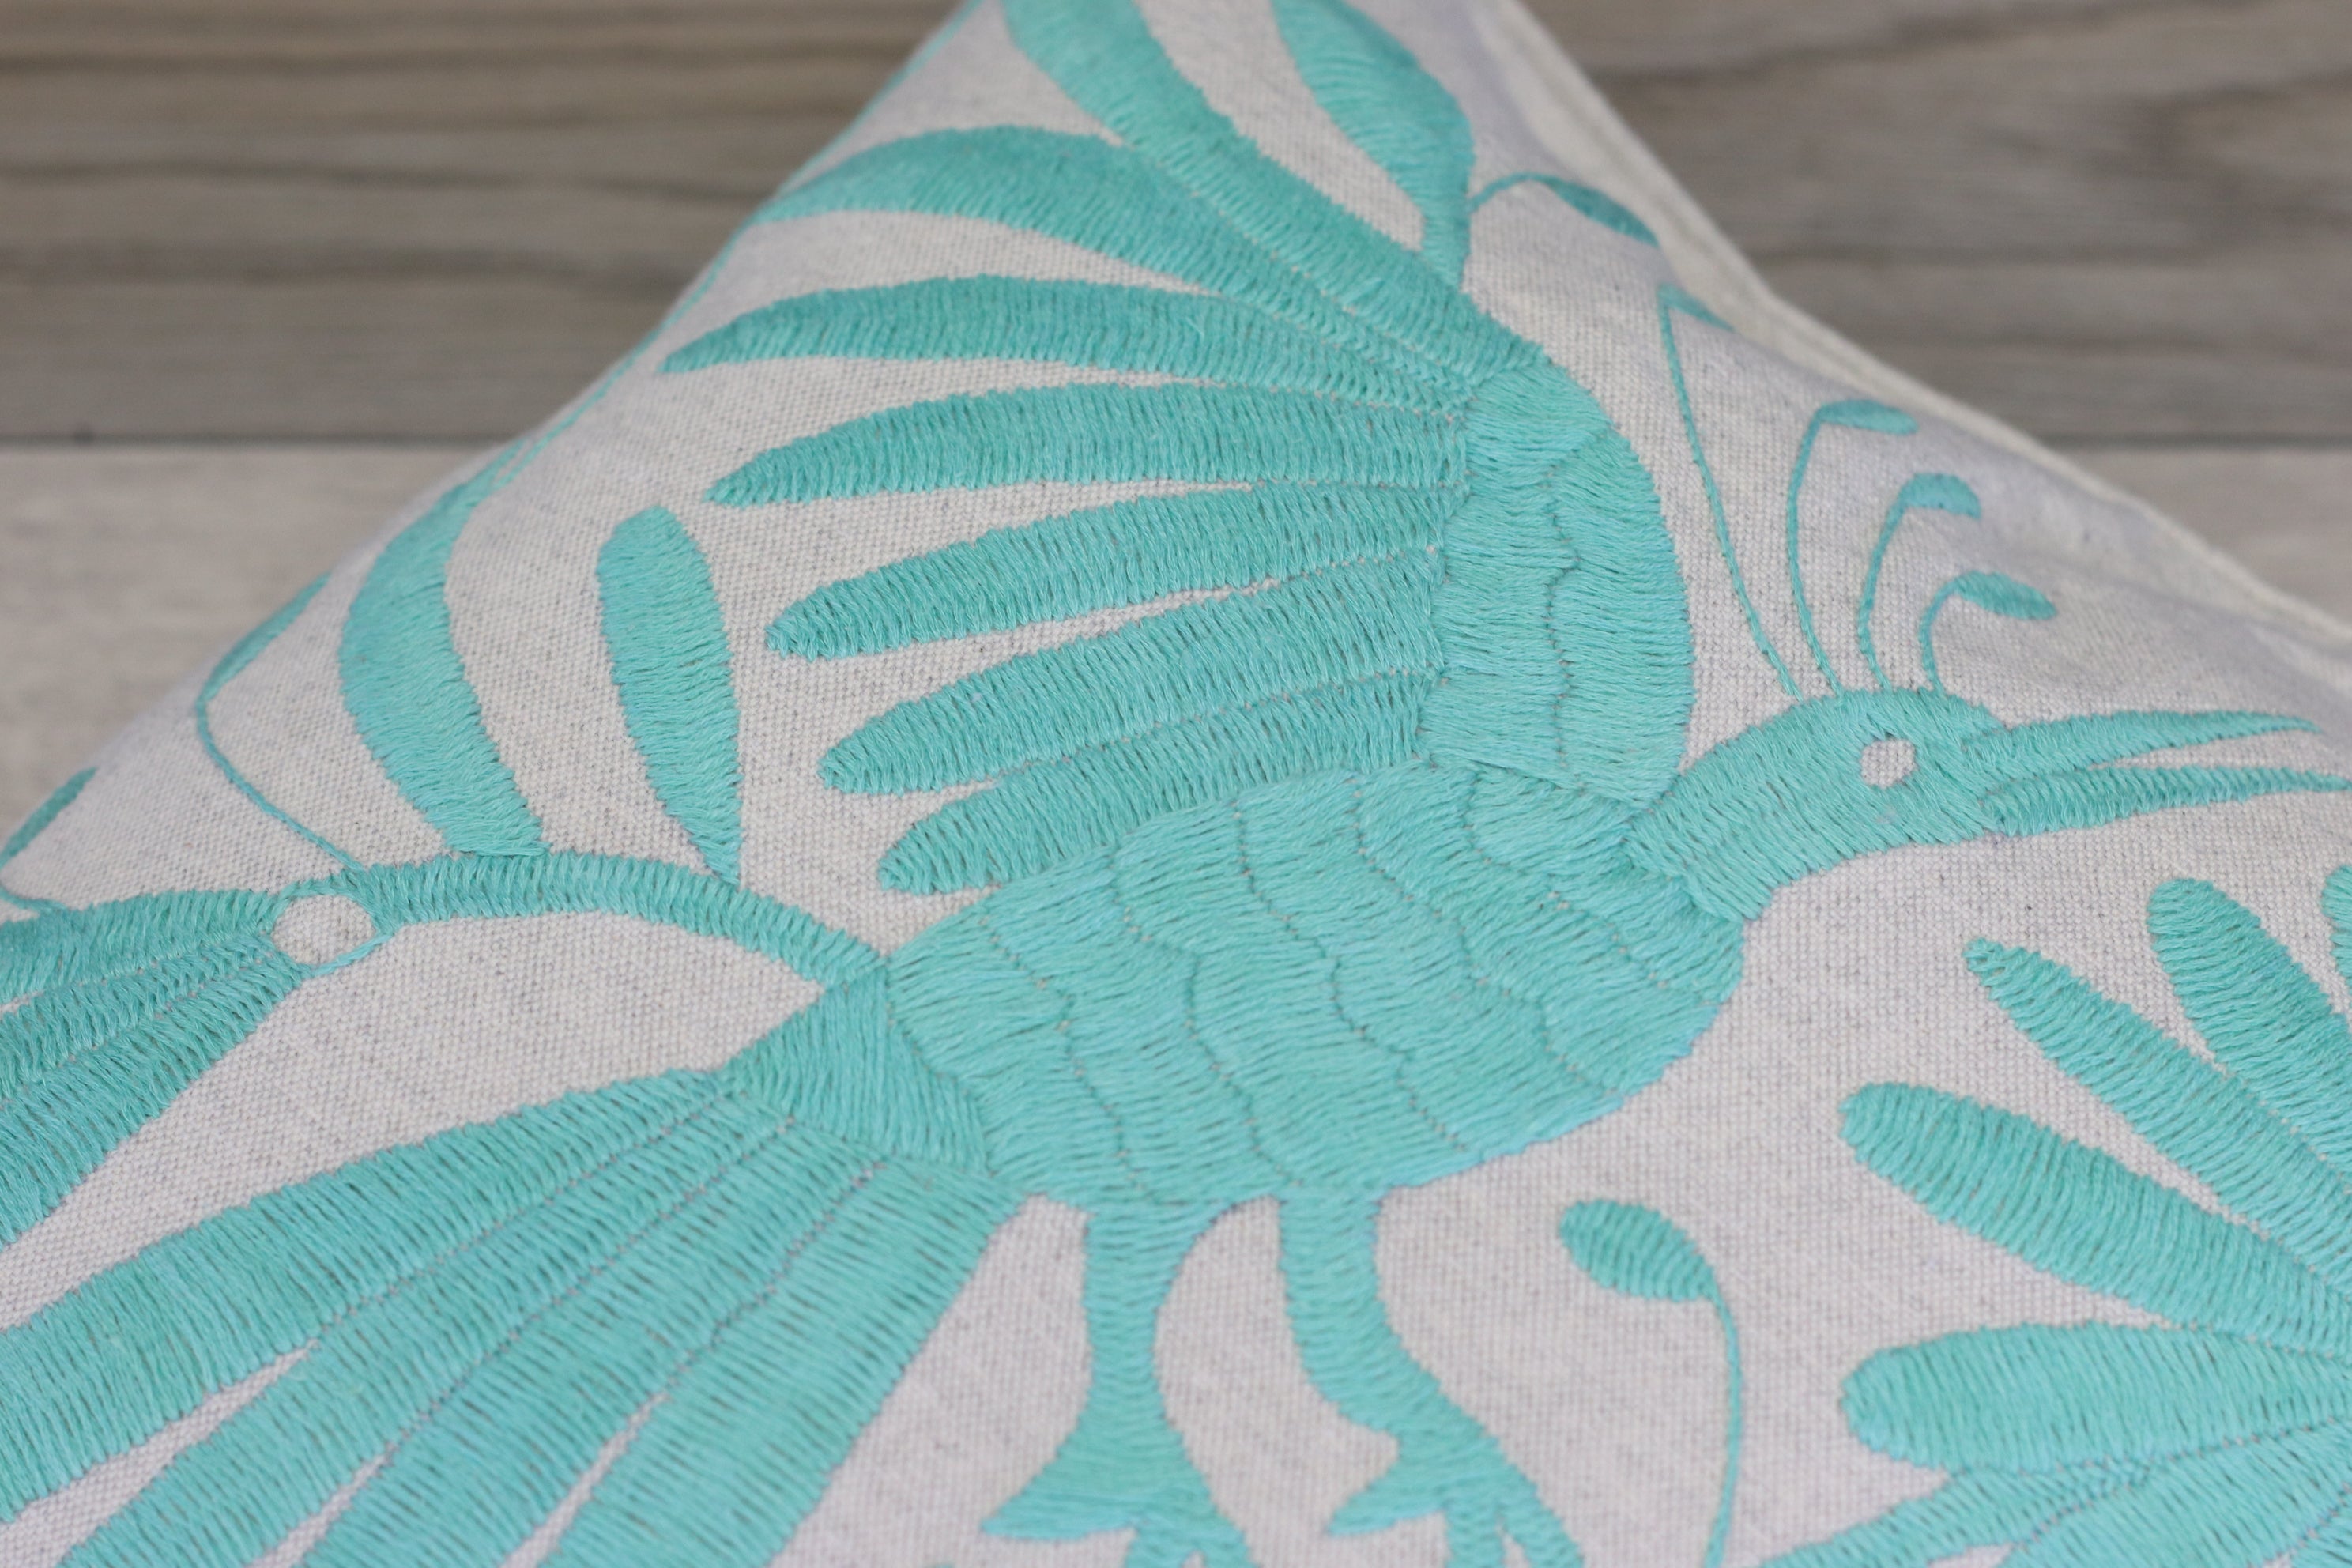 Aqua Blue Bird and Flowers Embroidered Pillow Cover with Gray Background. Handmade in Mexico. Ships from the USA. Buy now at www.felipeandgrace.com. 